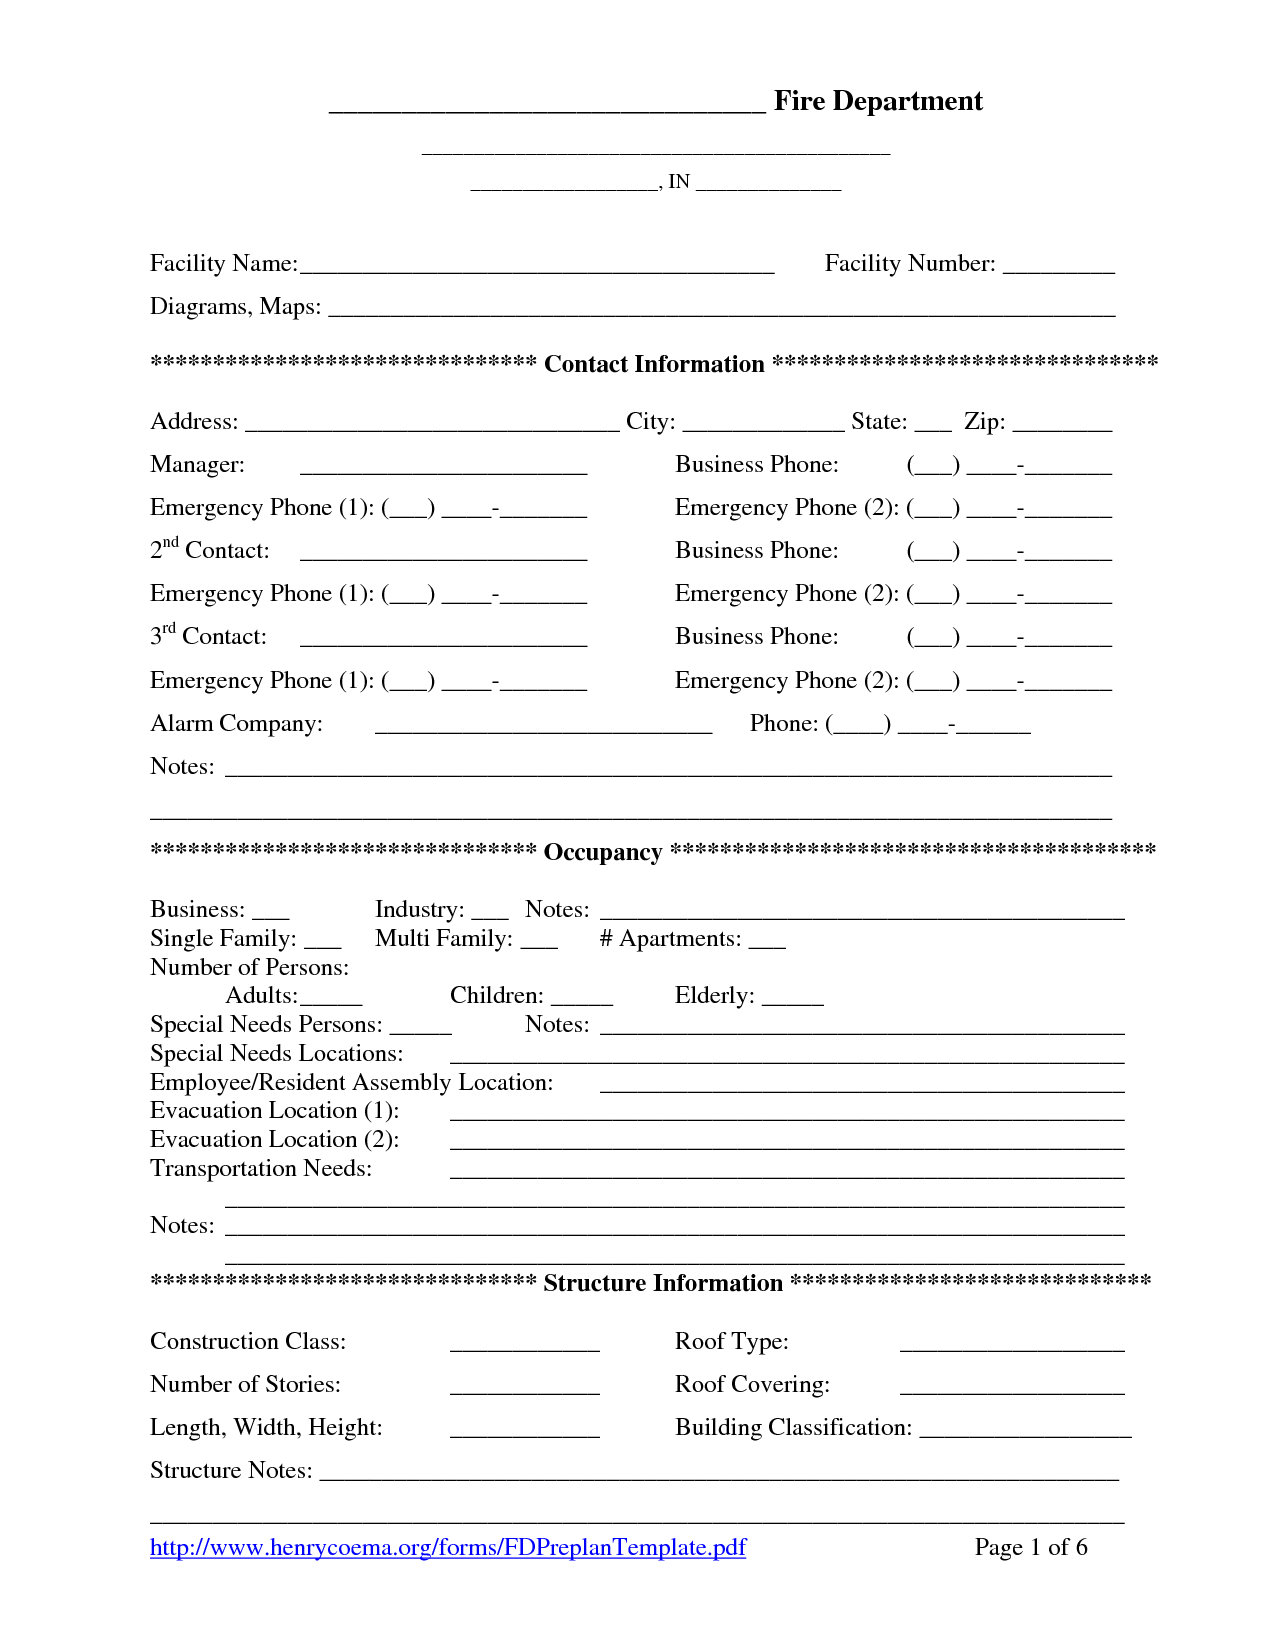 003 Fire Department Pre Plan 458591  Tinypetition And Fire Department Pre Plan Worksheet